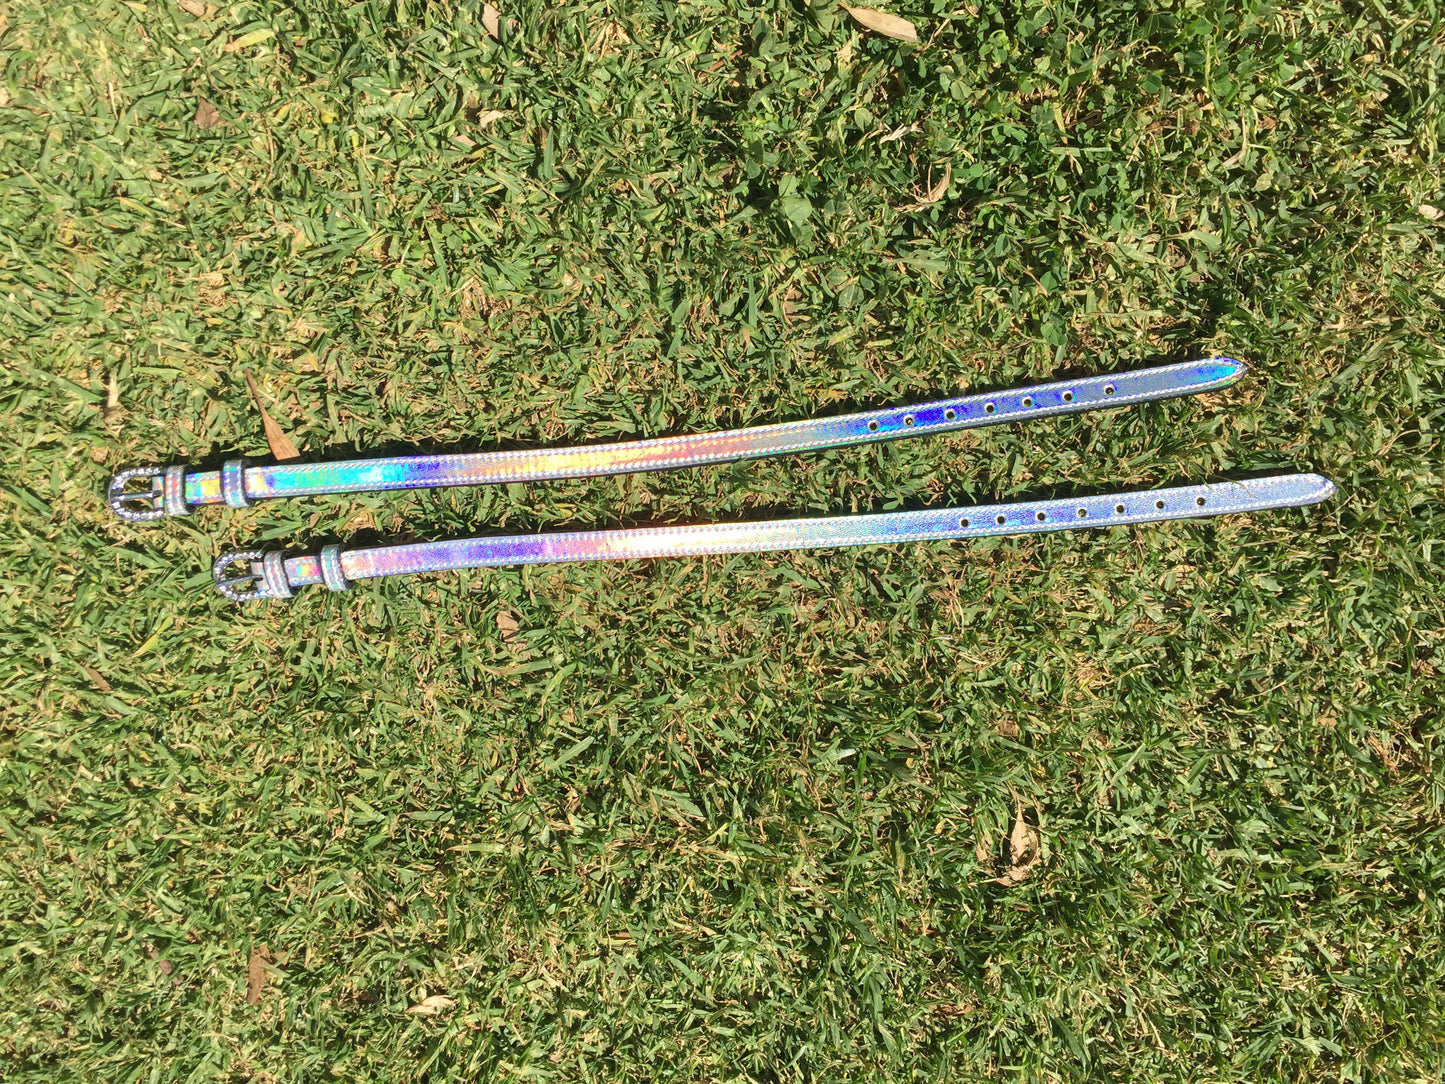 Holographic spur straps